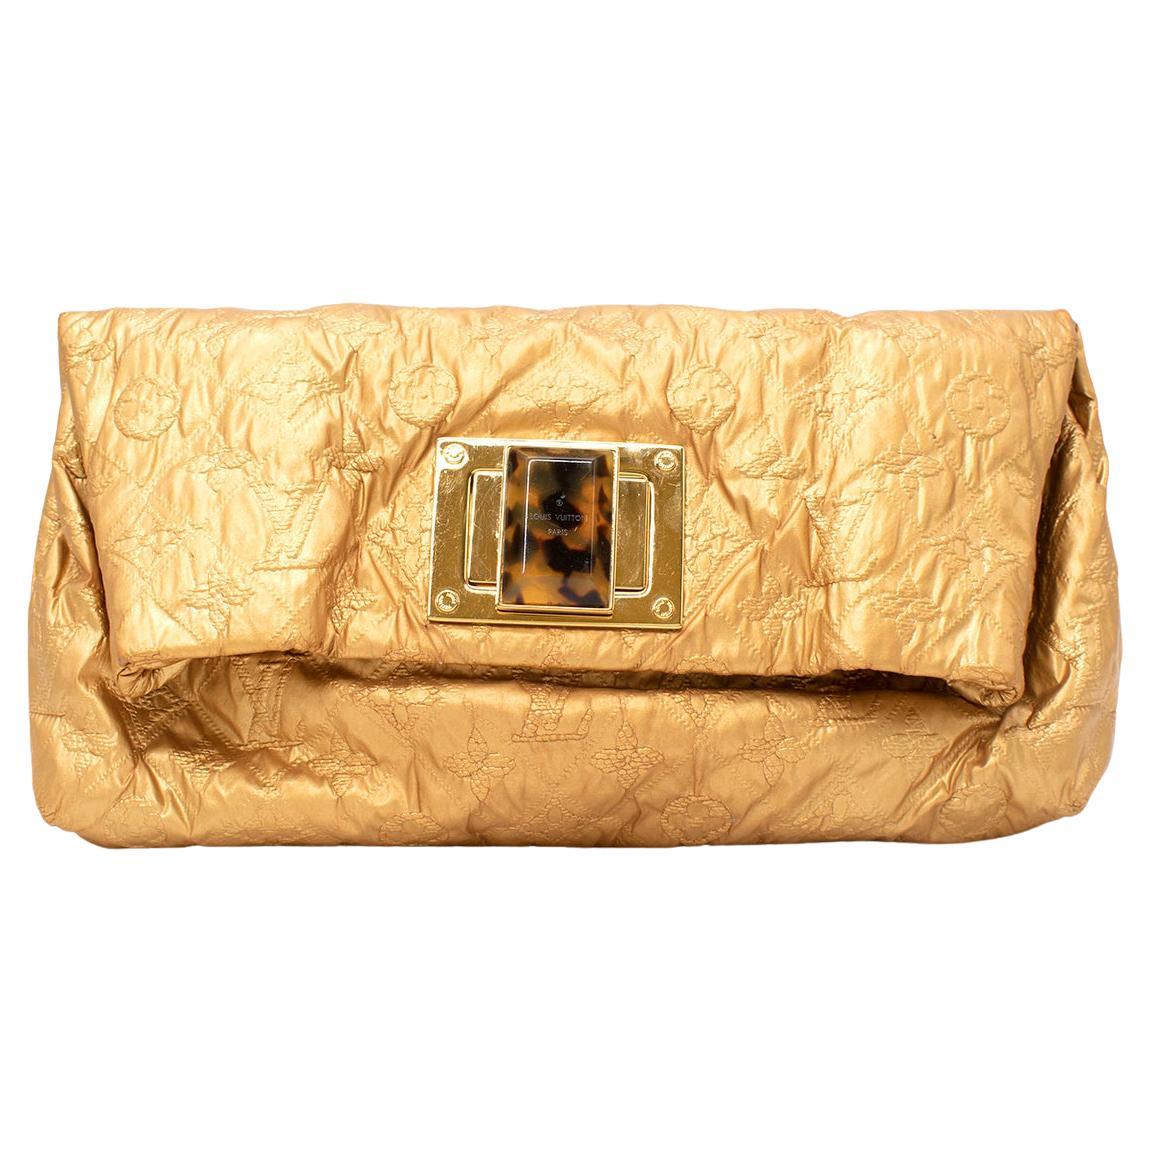 Louis Vuitton 2012 pre-owned Monogram Limelight Altair clutch